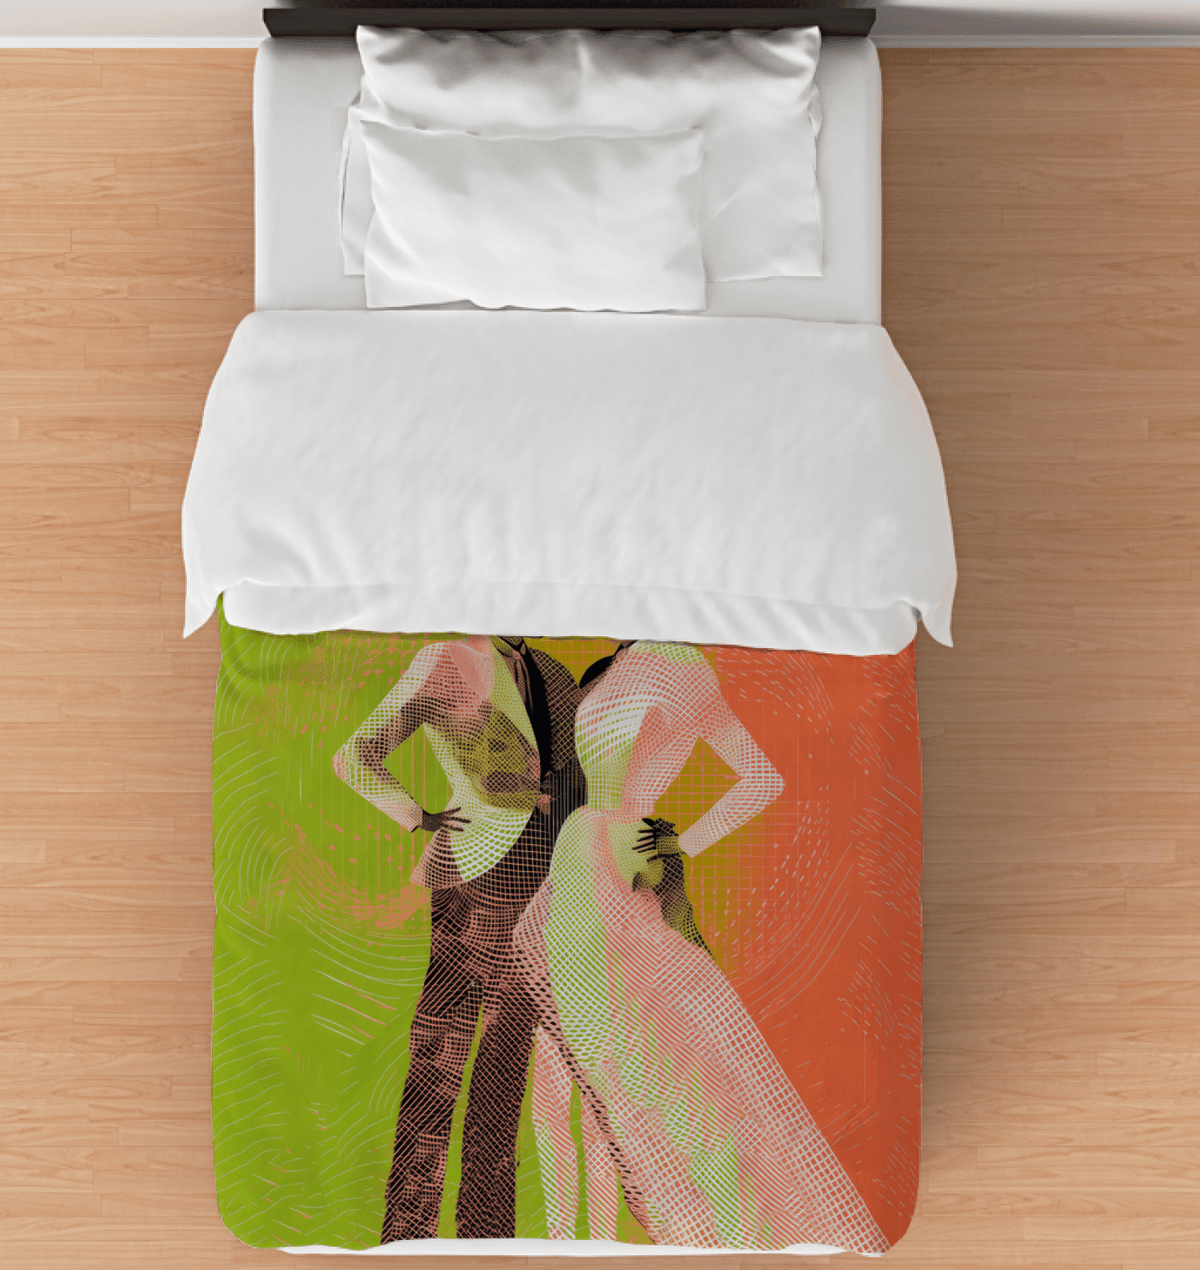 Stylish bedroom decor with dance-inspired duvet cover.